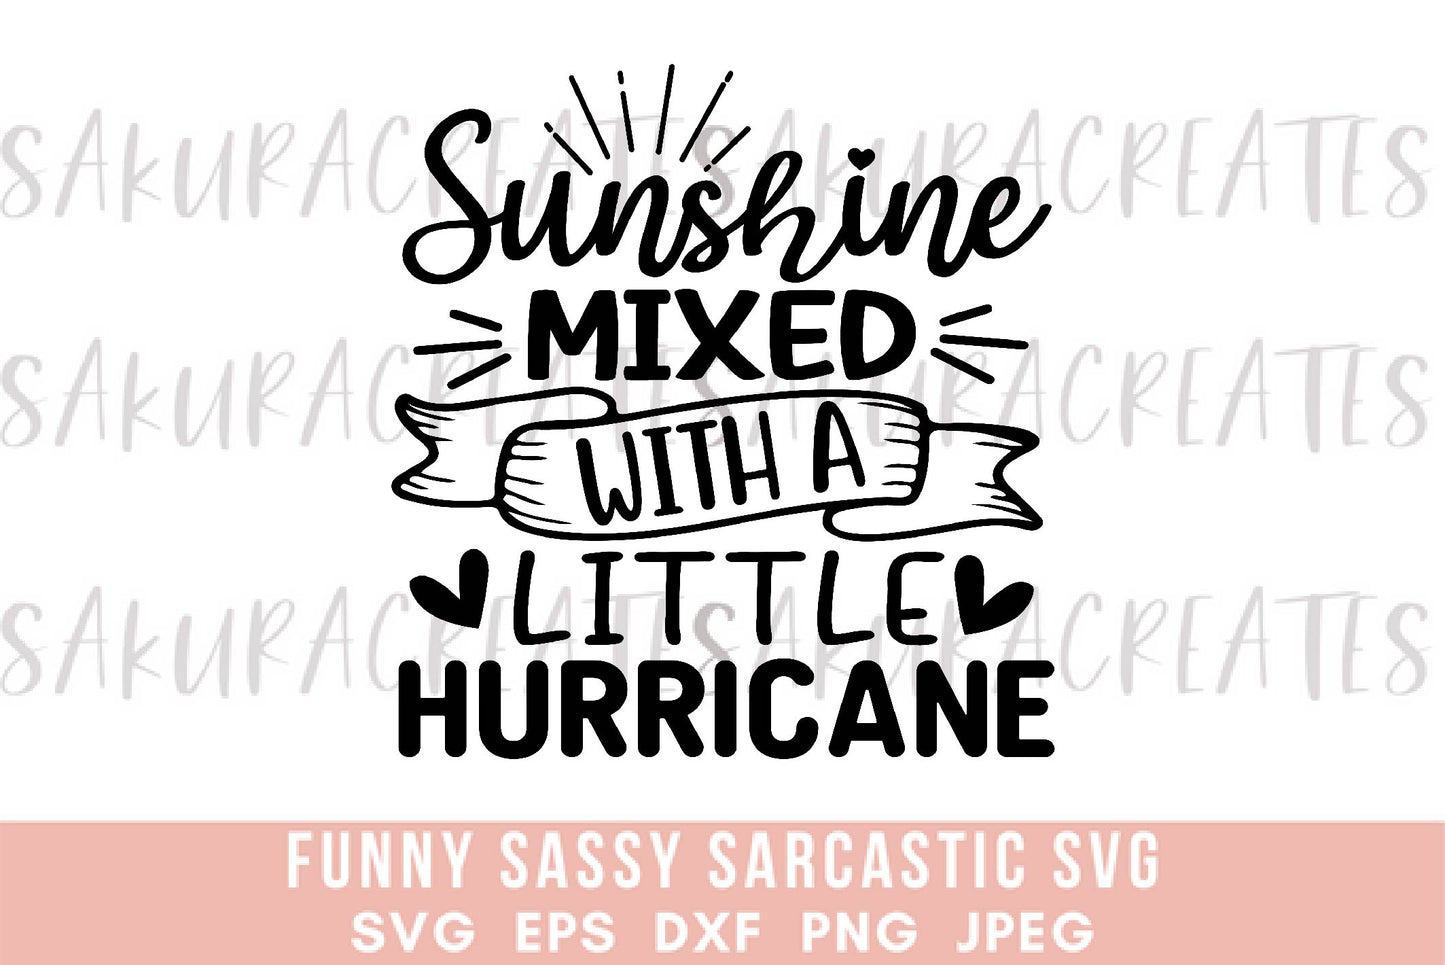 Sunshine mixed with a little hurricane SVG DXF EPS PNG JPEG SVG cut file silhouette cricut funny sarcastic sassy quotes sayings